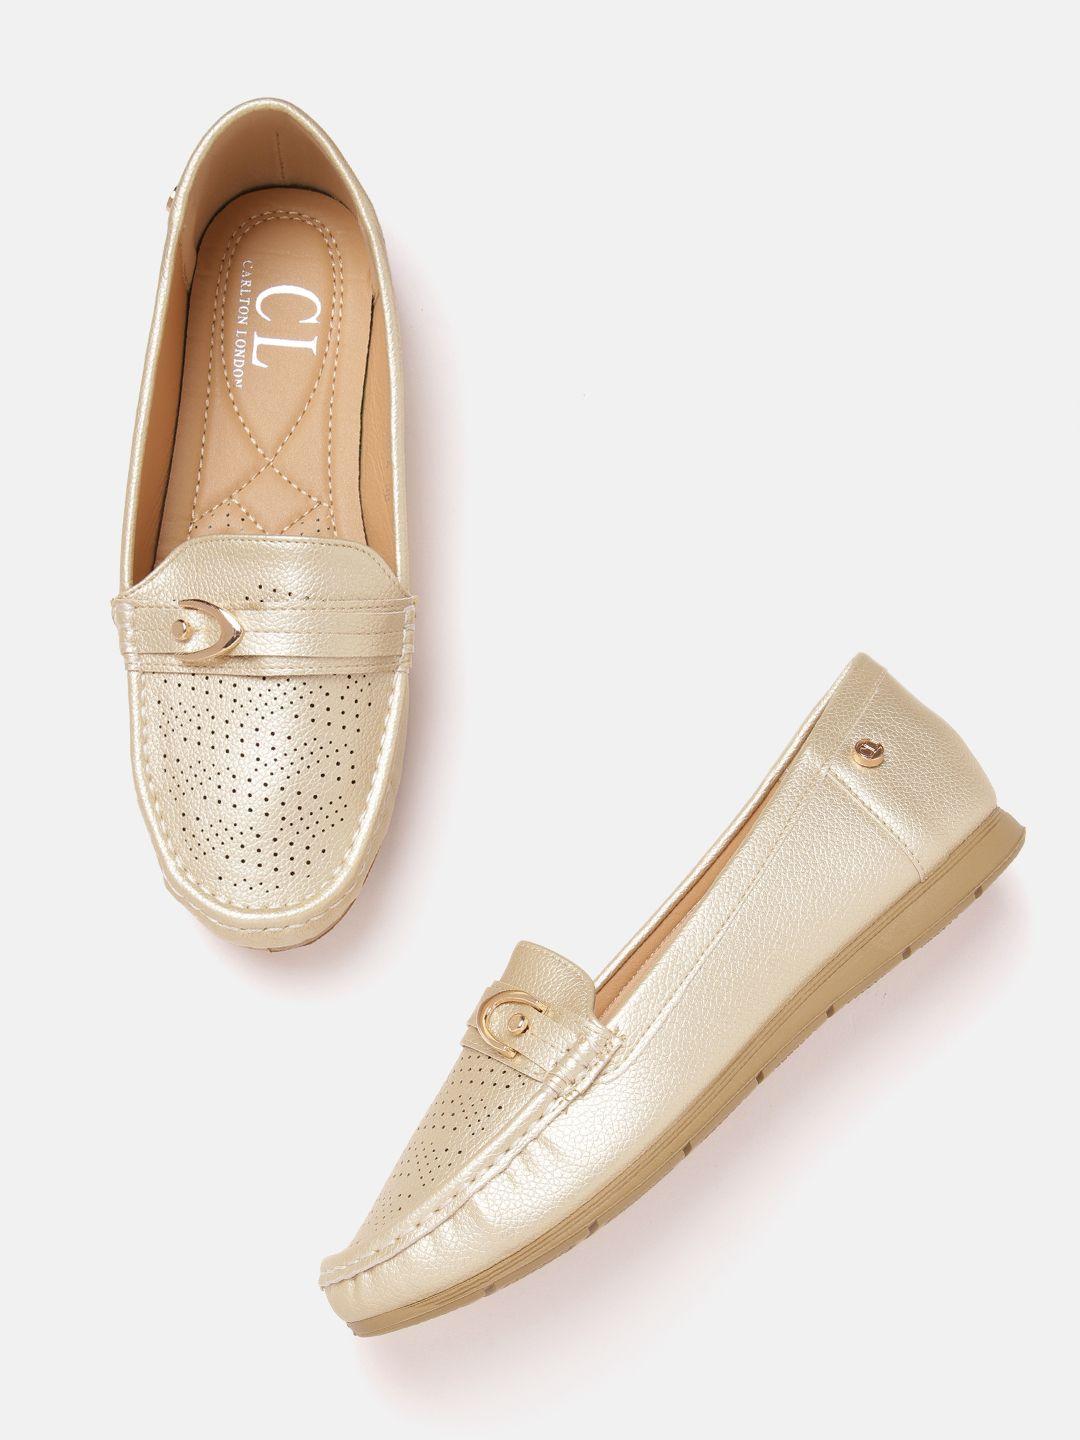 carlton london women perforated loafers